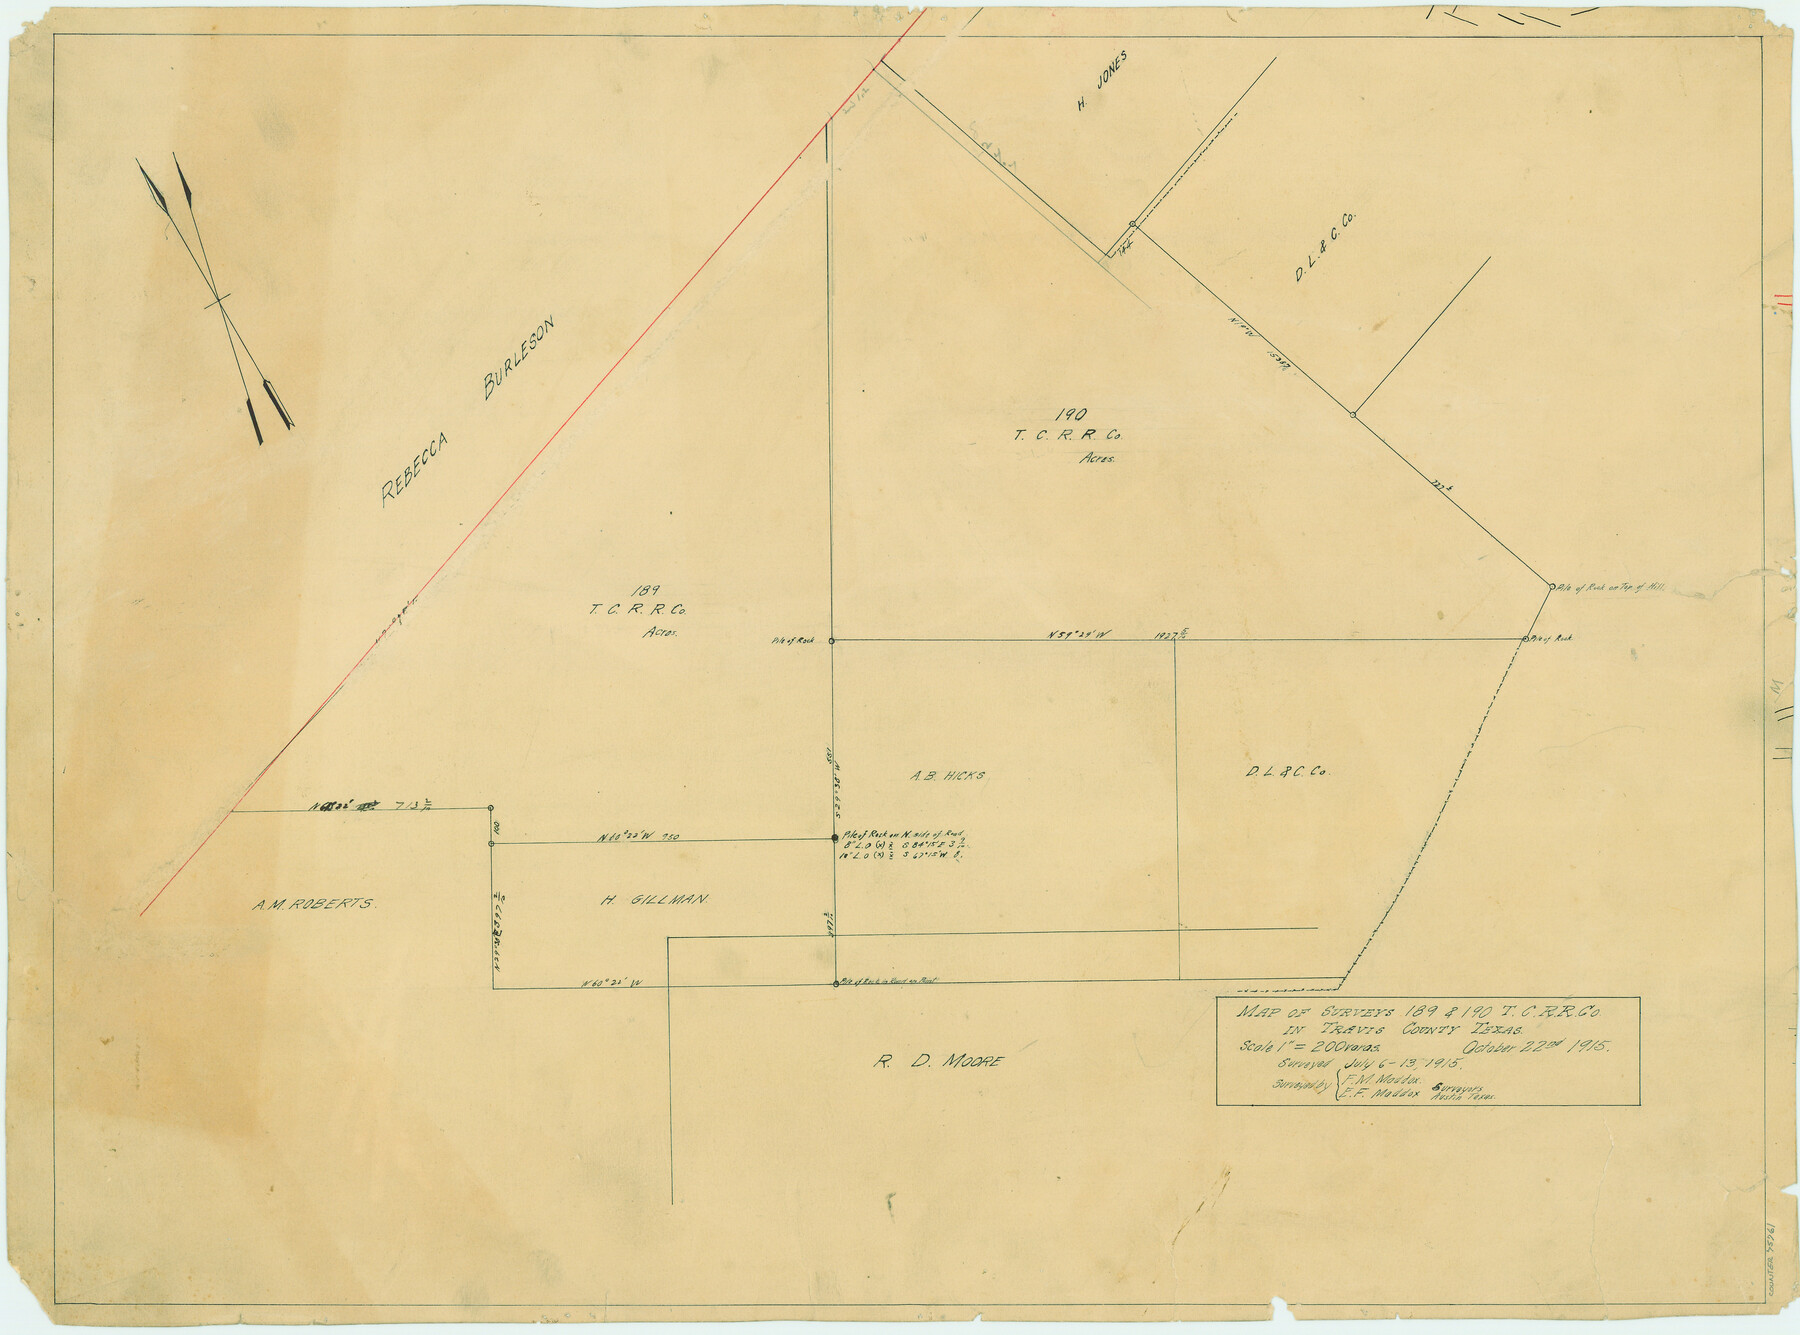 75761, Map of surveys 189 & 190, T. C. R.R. Co. in Travis County, Texas, Maddox Collection